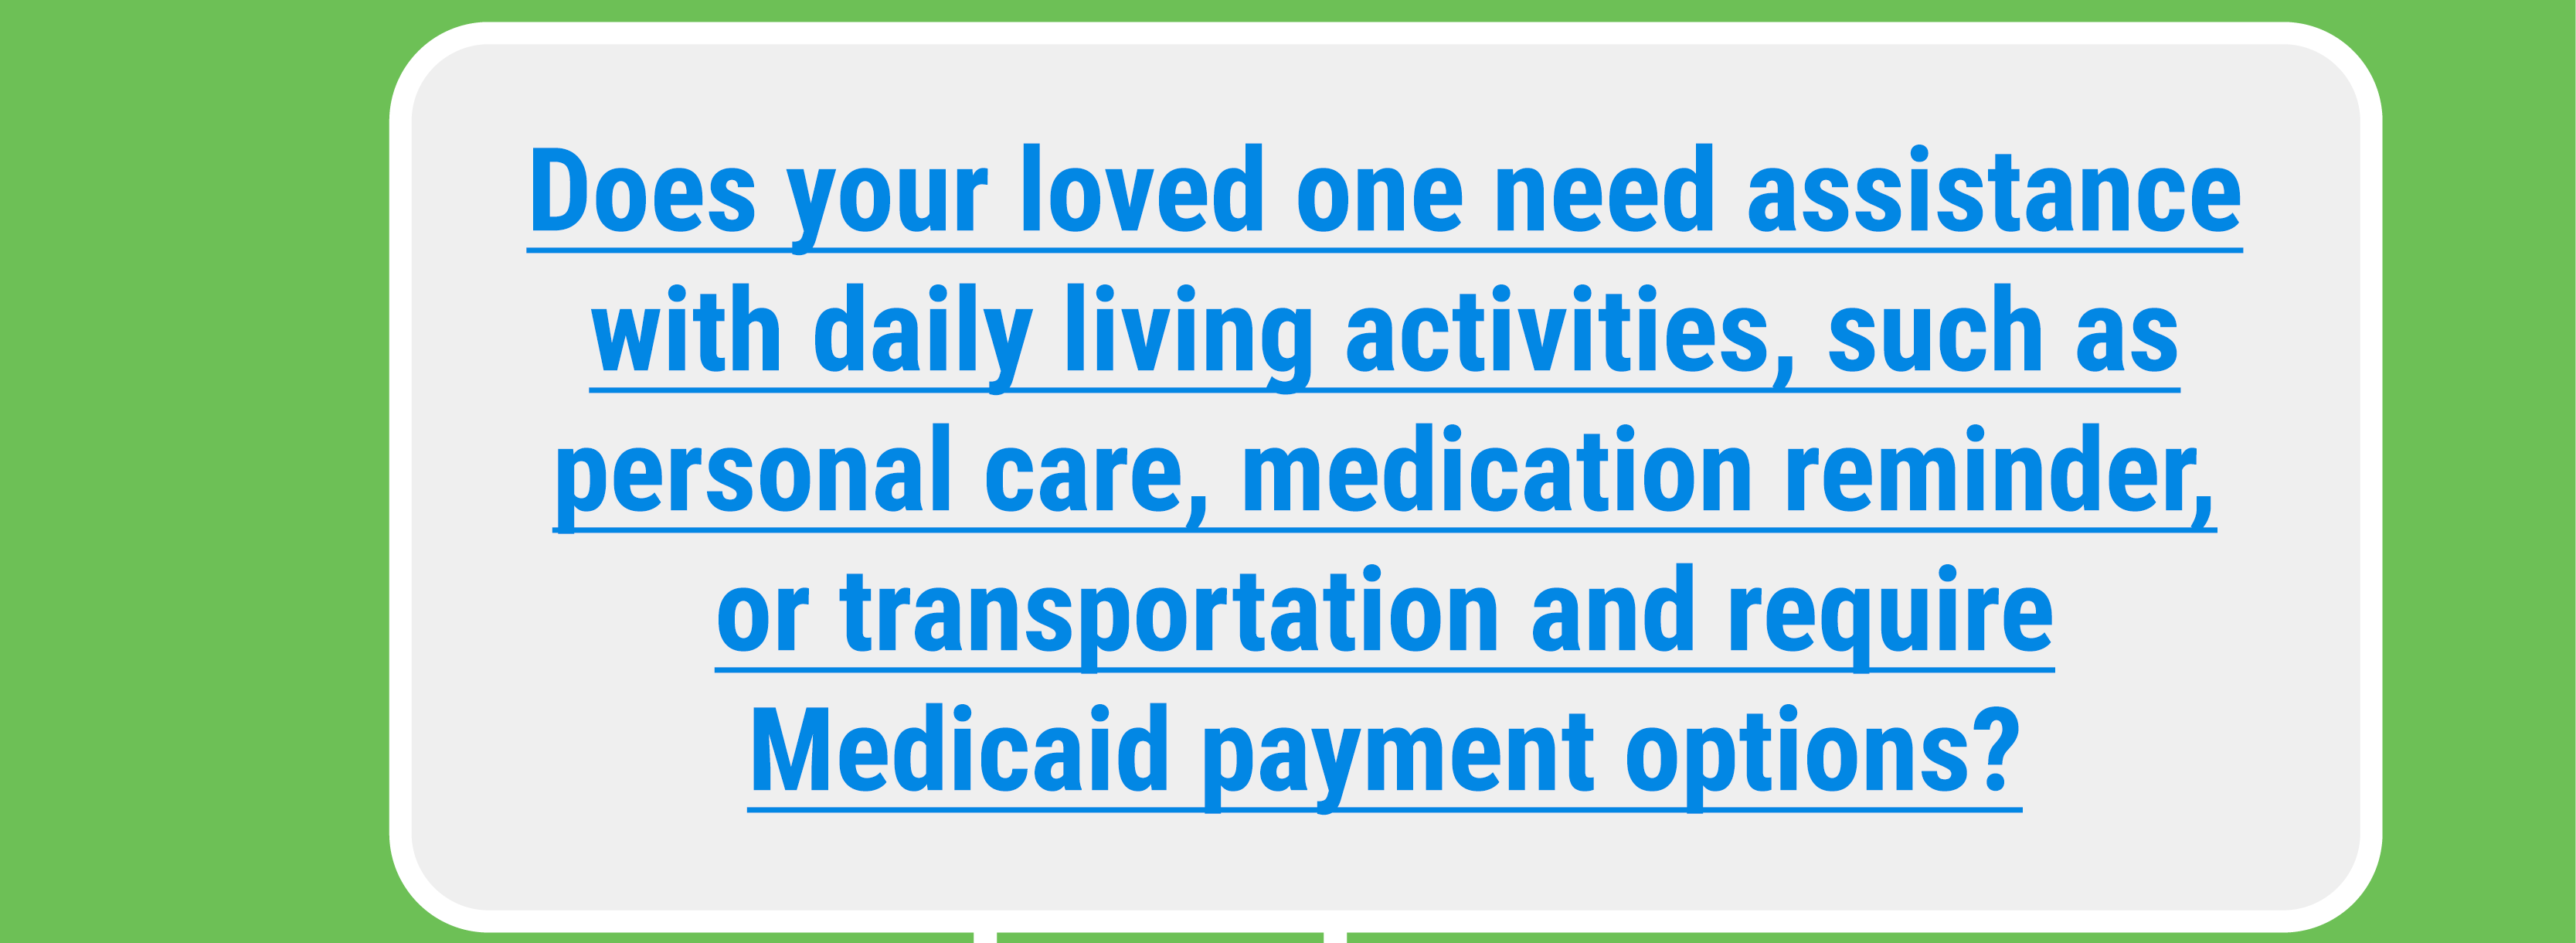 Does your loved one need assistance with daily living activities, such as personal care, medication reminder, or transportation and require Medicaid payment options?